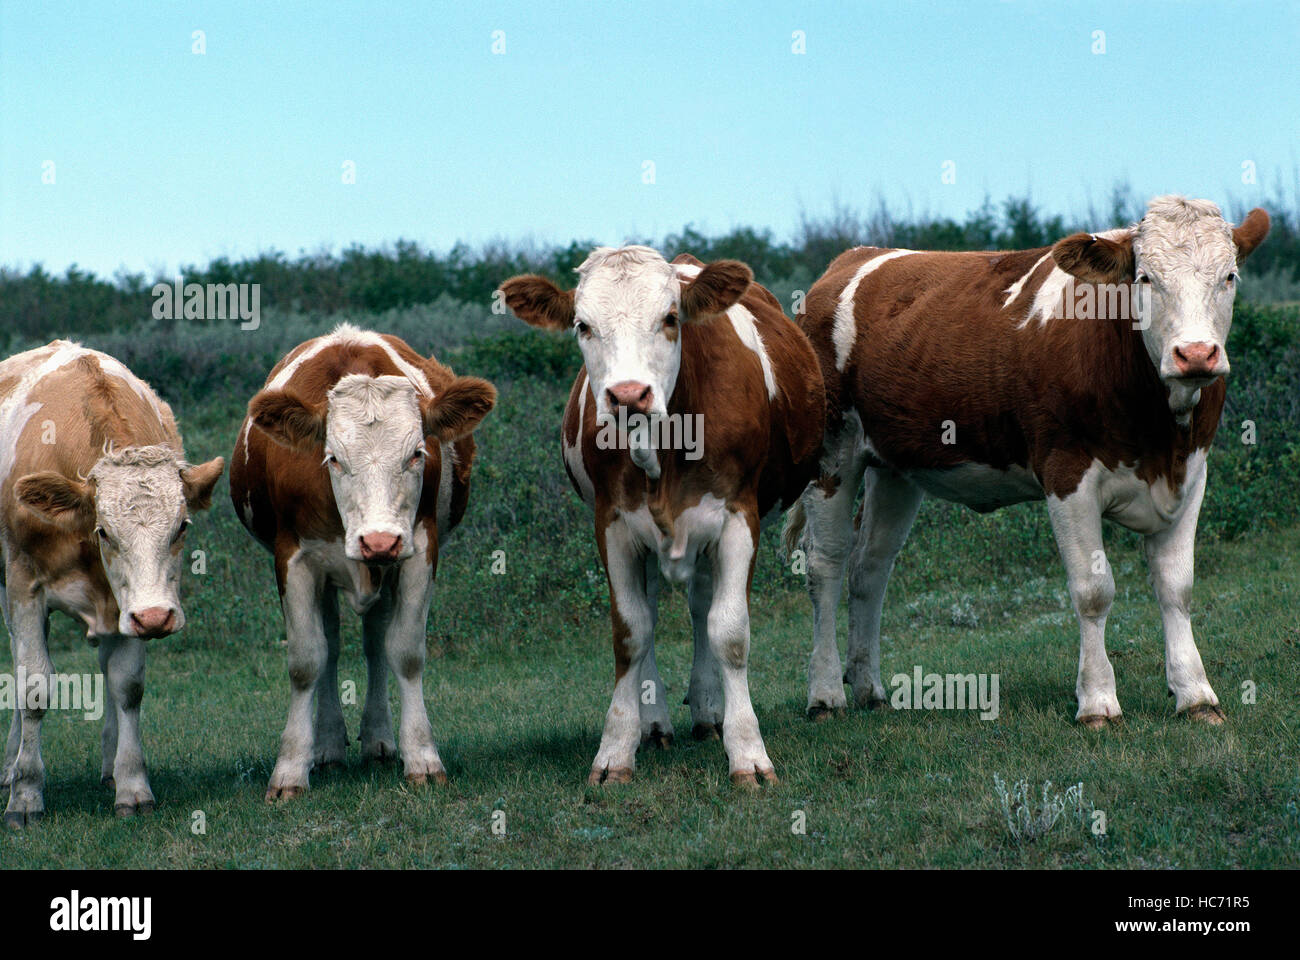 Four Curious Cows and Heifers / Cattle standing in a Pasture and looking at Camera Stock Photo